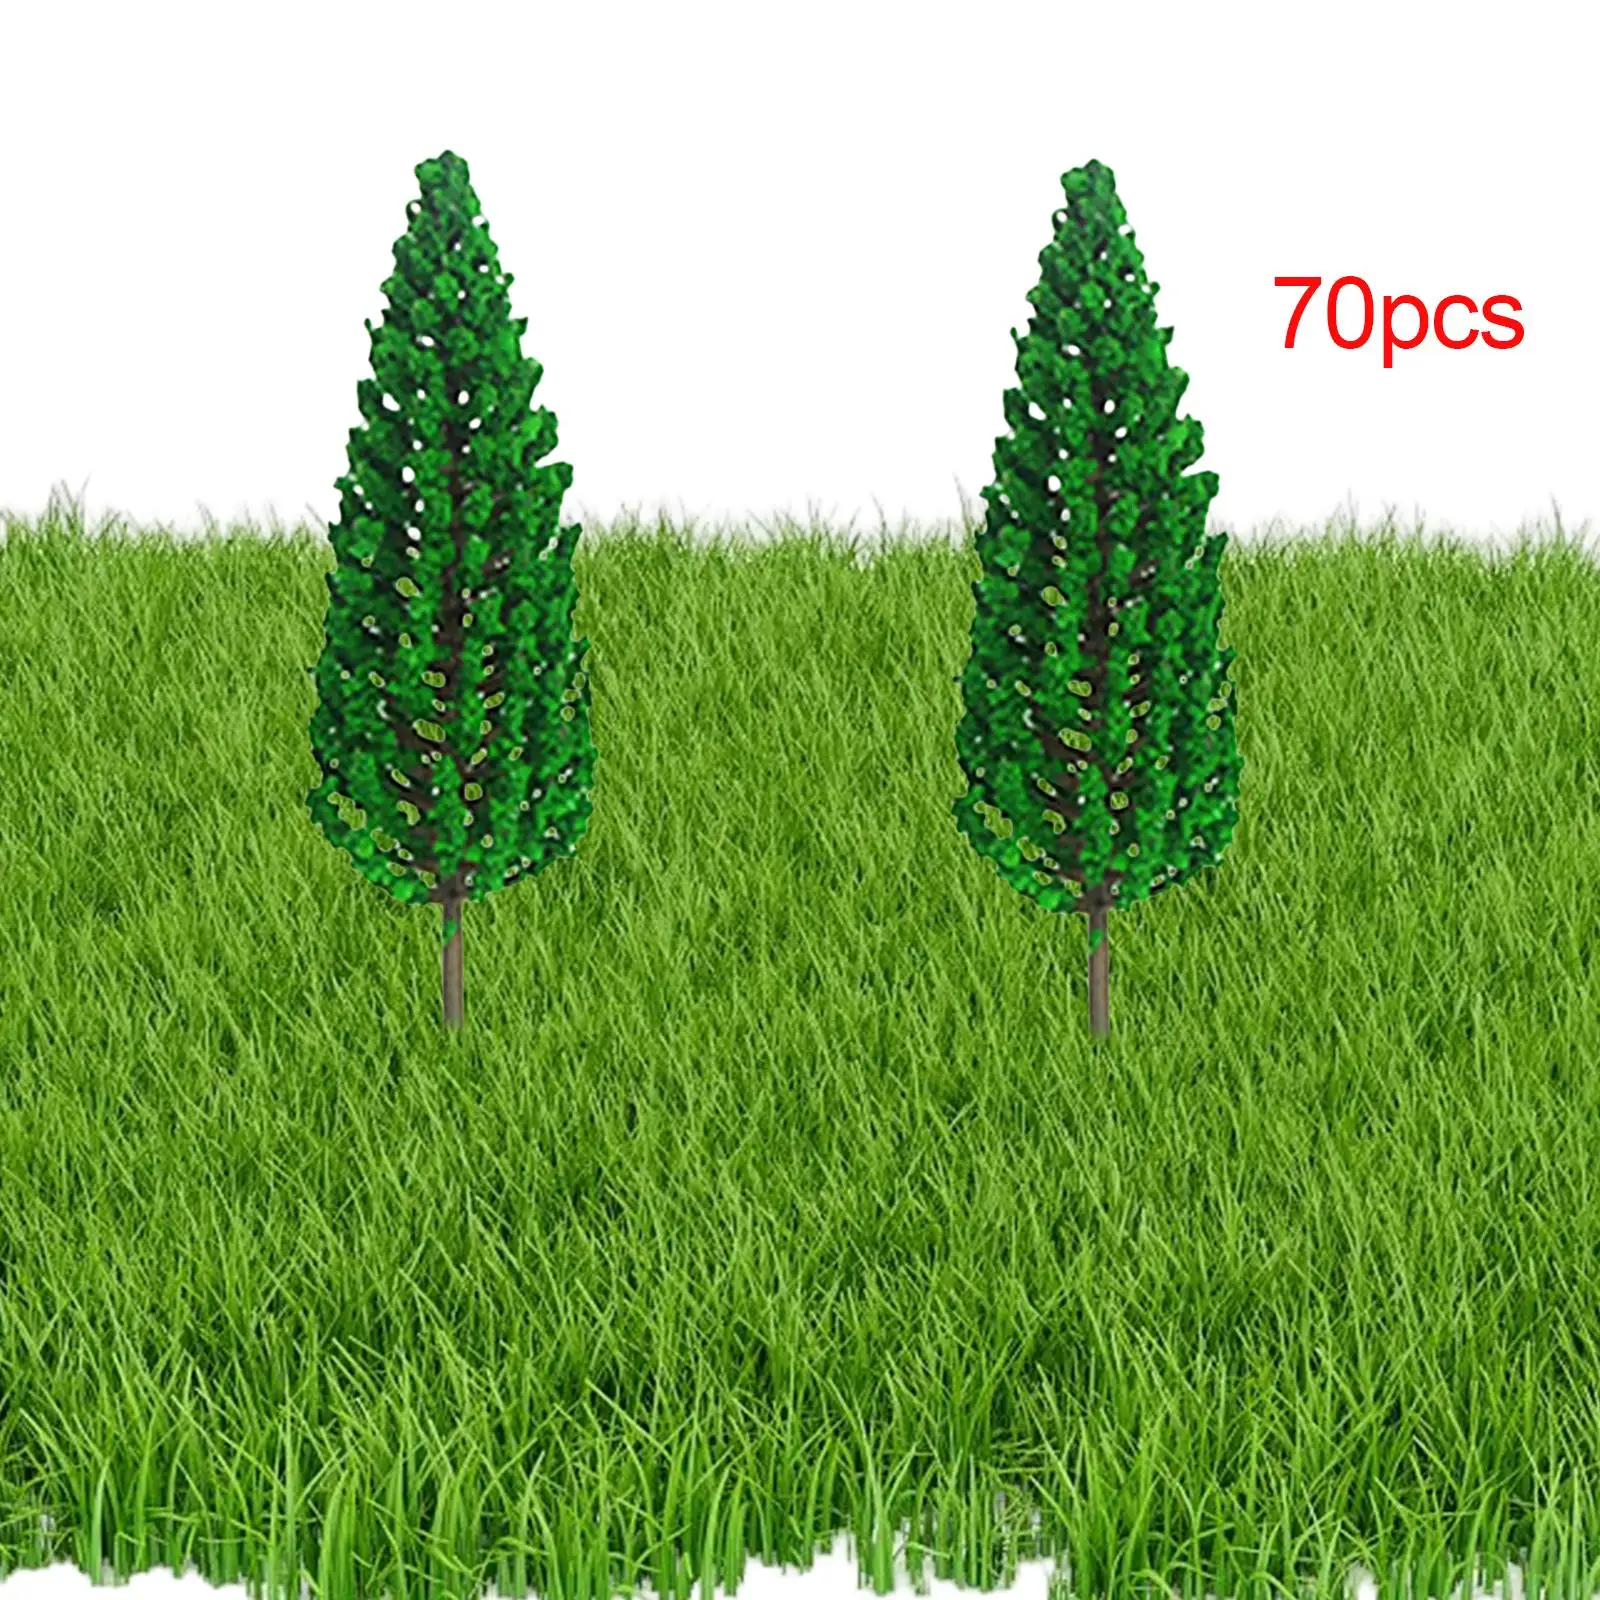 70Pcs Scenery Tree 1/300 Scale 6cm Miniature Landscape Trees Train Scenery Architecture Trees for Railroad Sand Table DIY Crafts